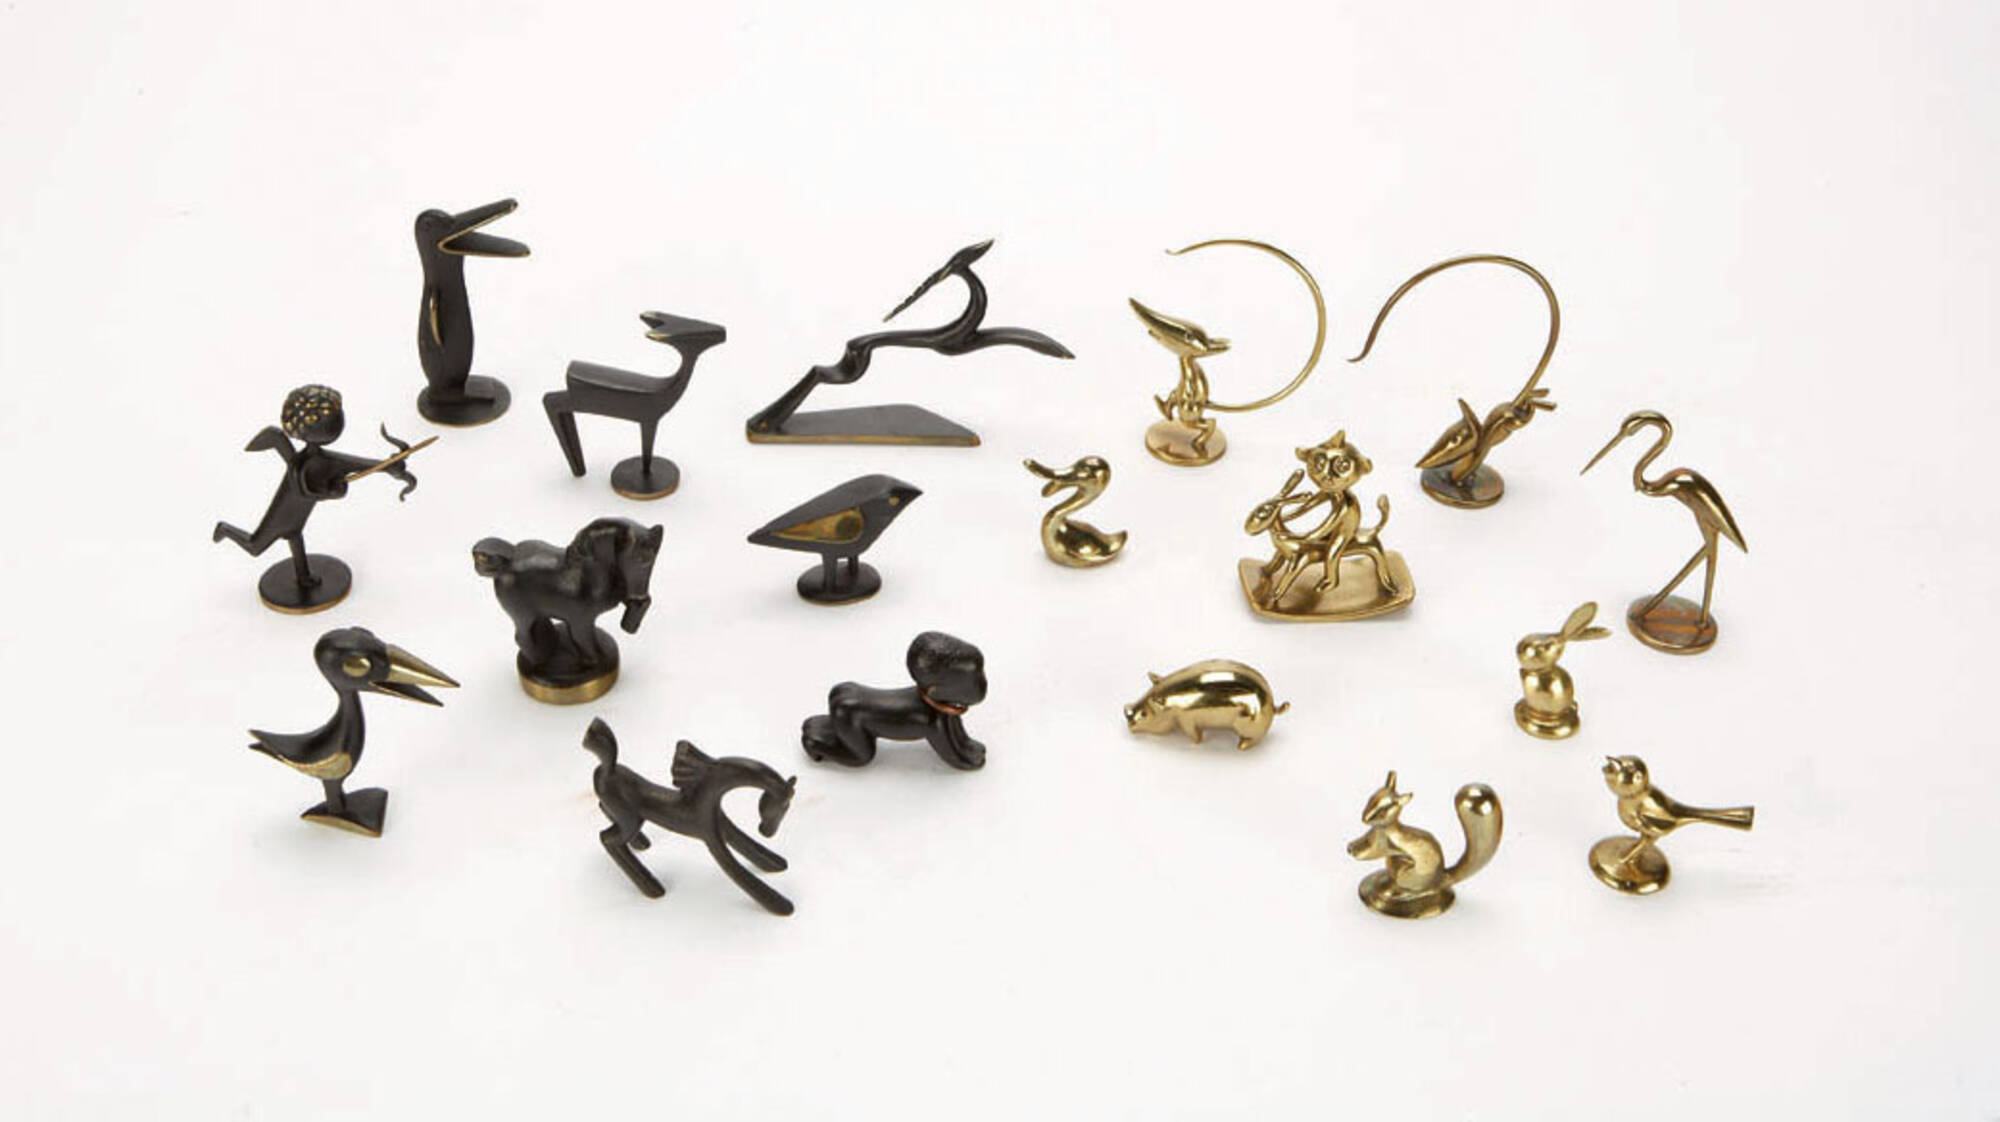 Brass Figurines & Miniatures for Sale at Auction